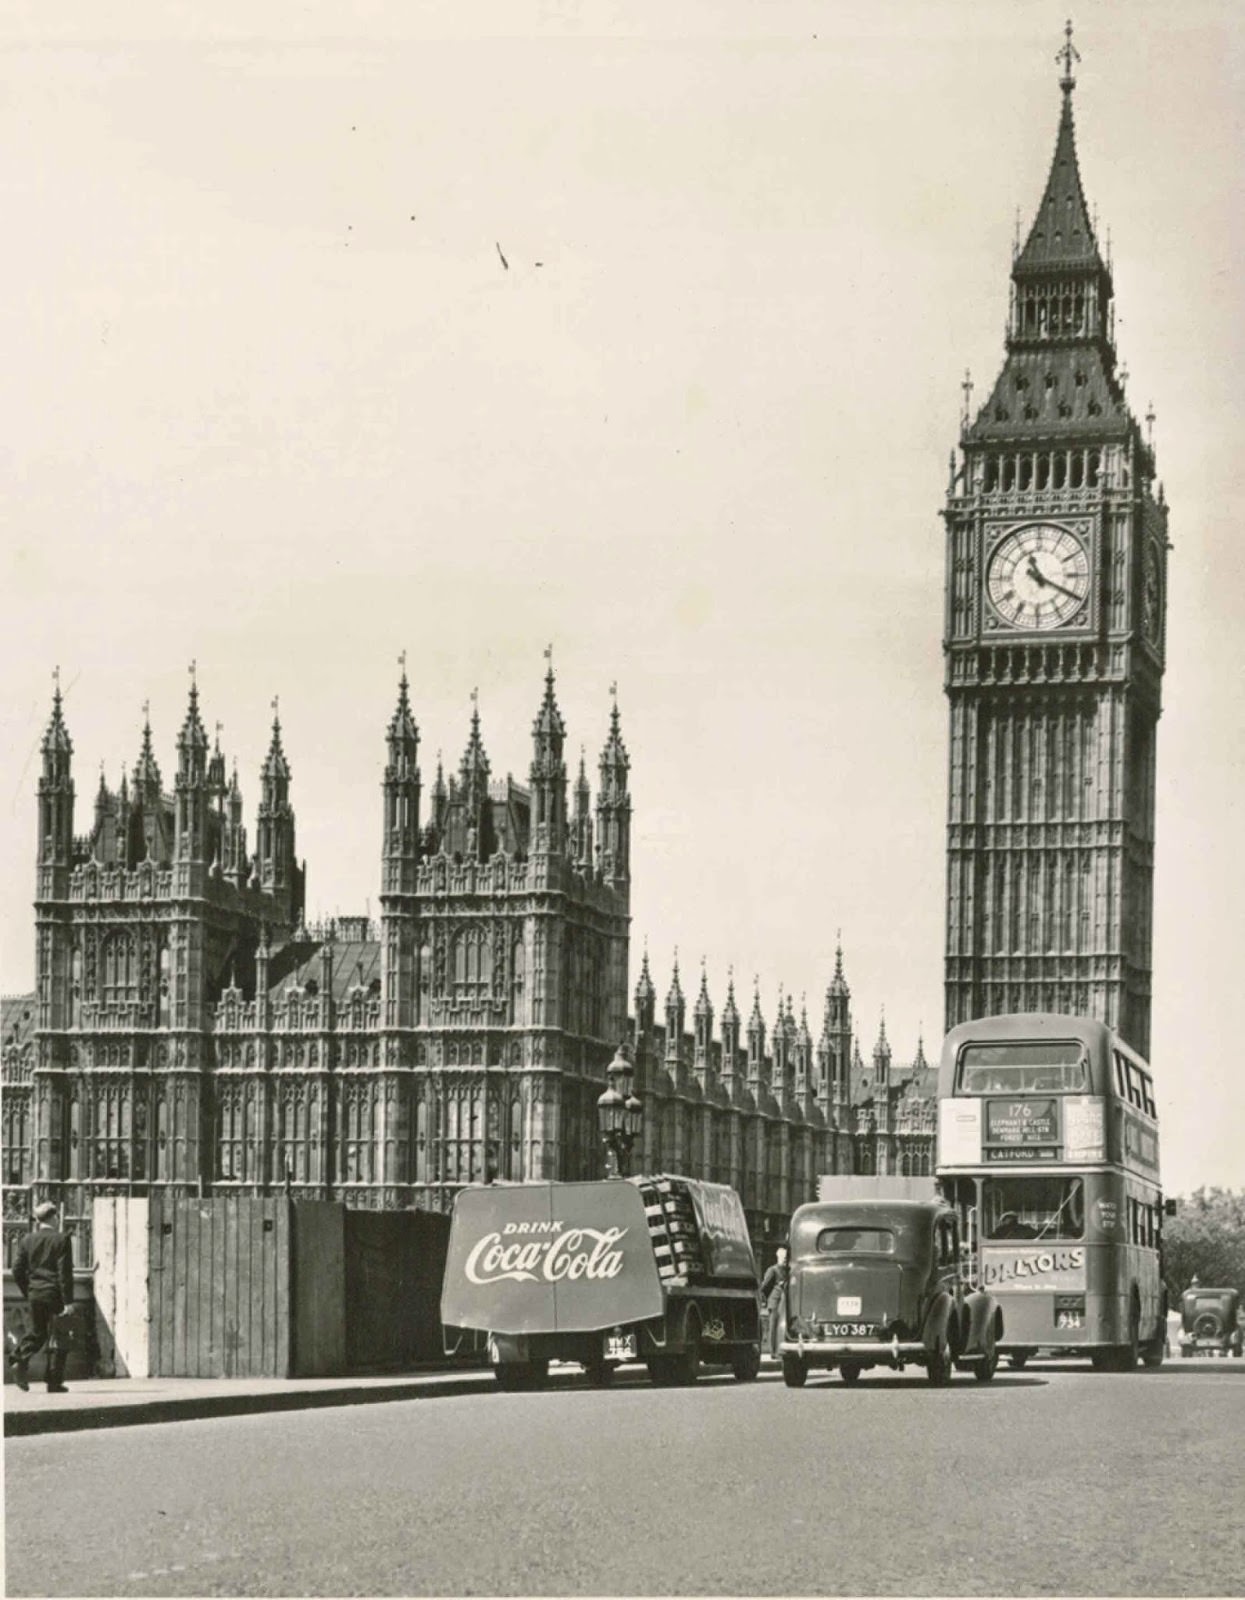 A Coca-Cola delivery truck on Westminster Bridge with Big Ben and the Parliament buildings, 1953.